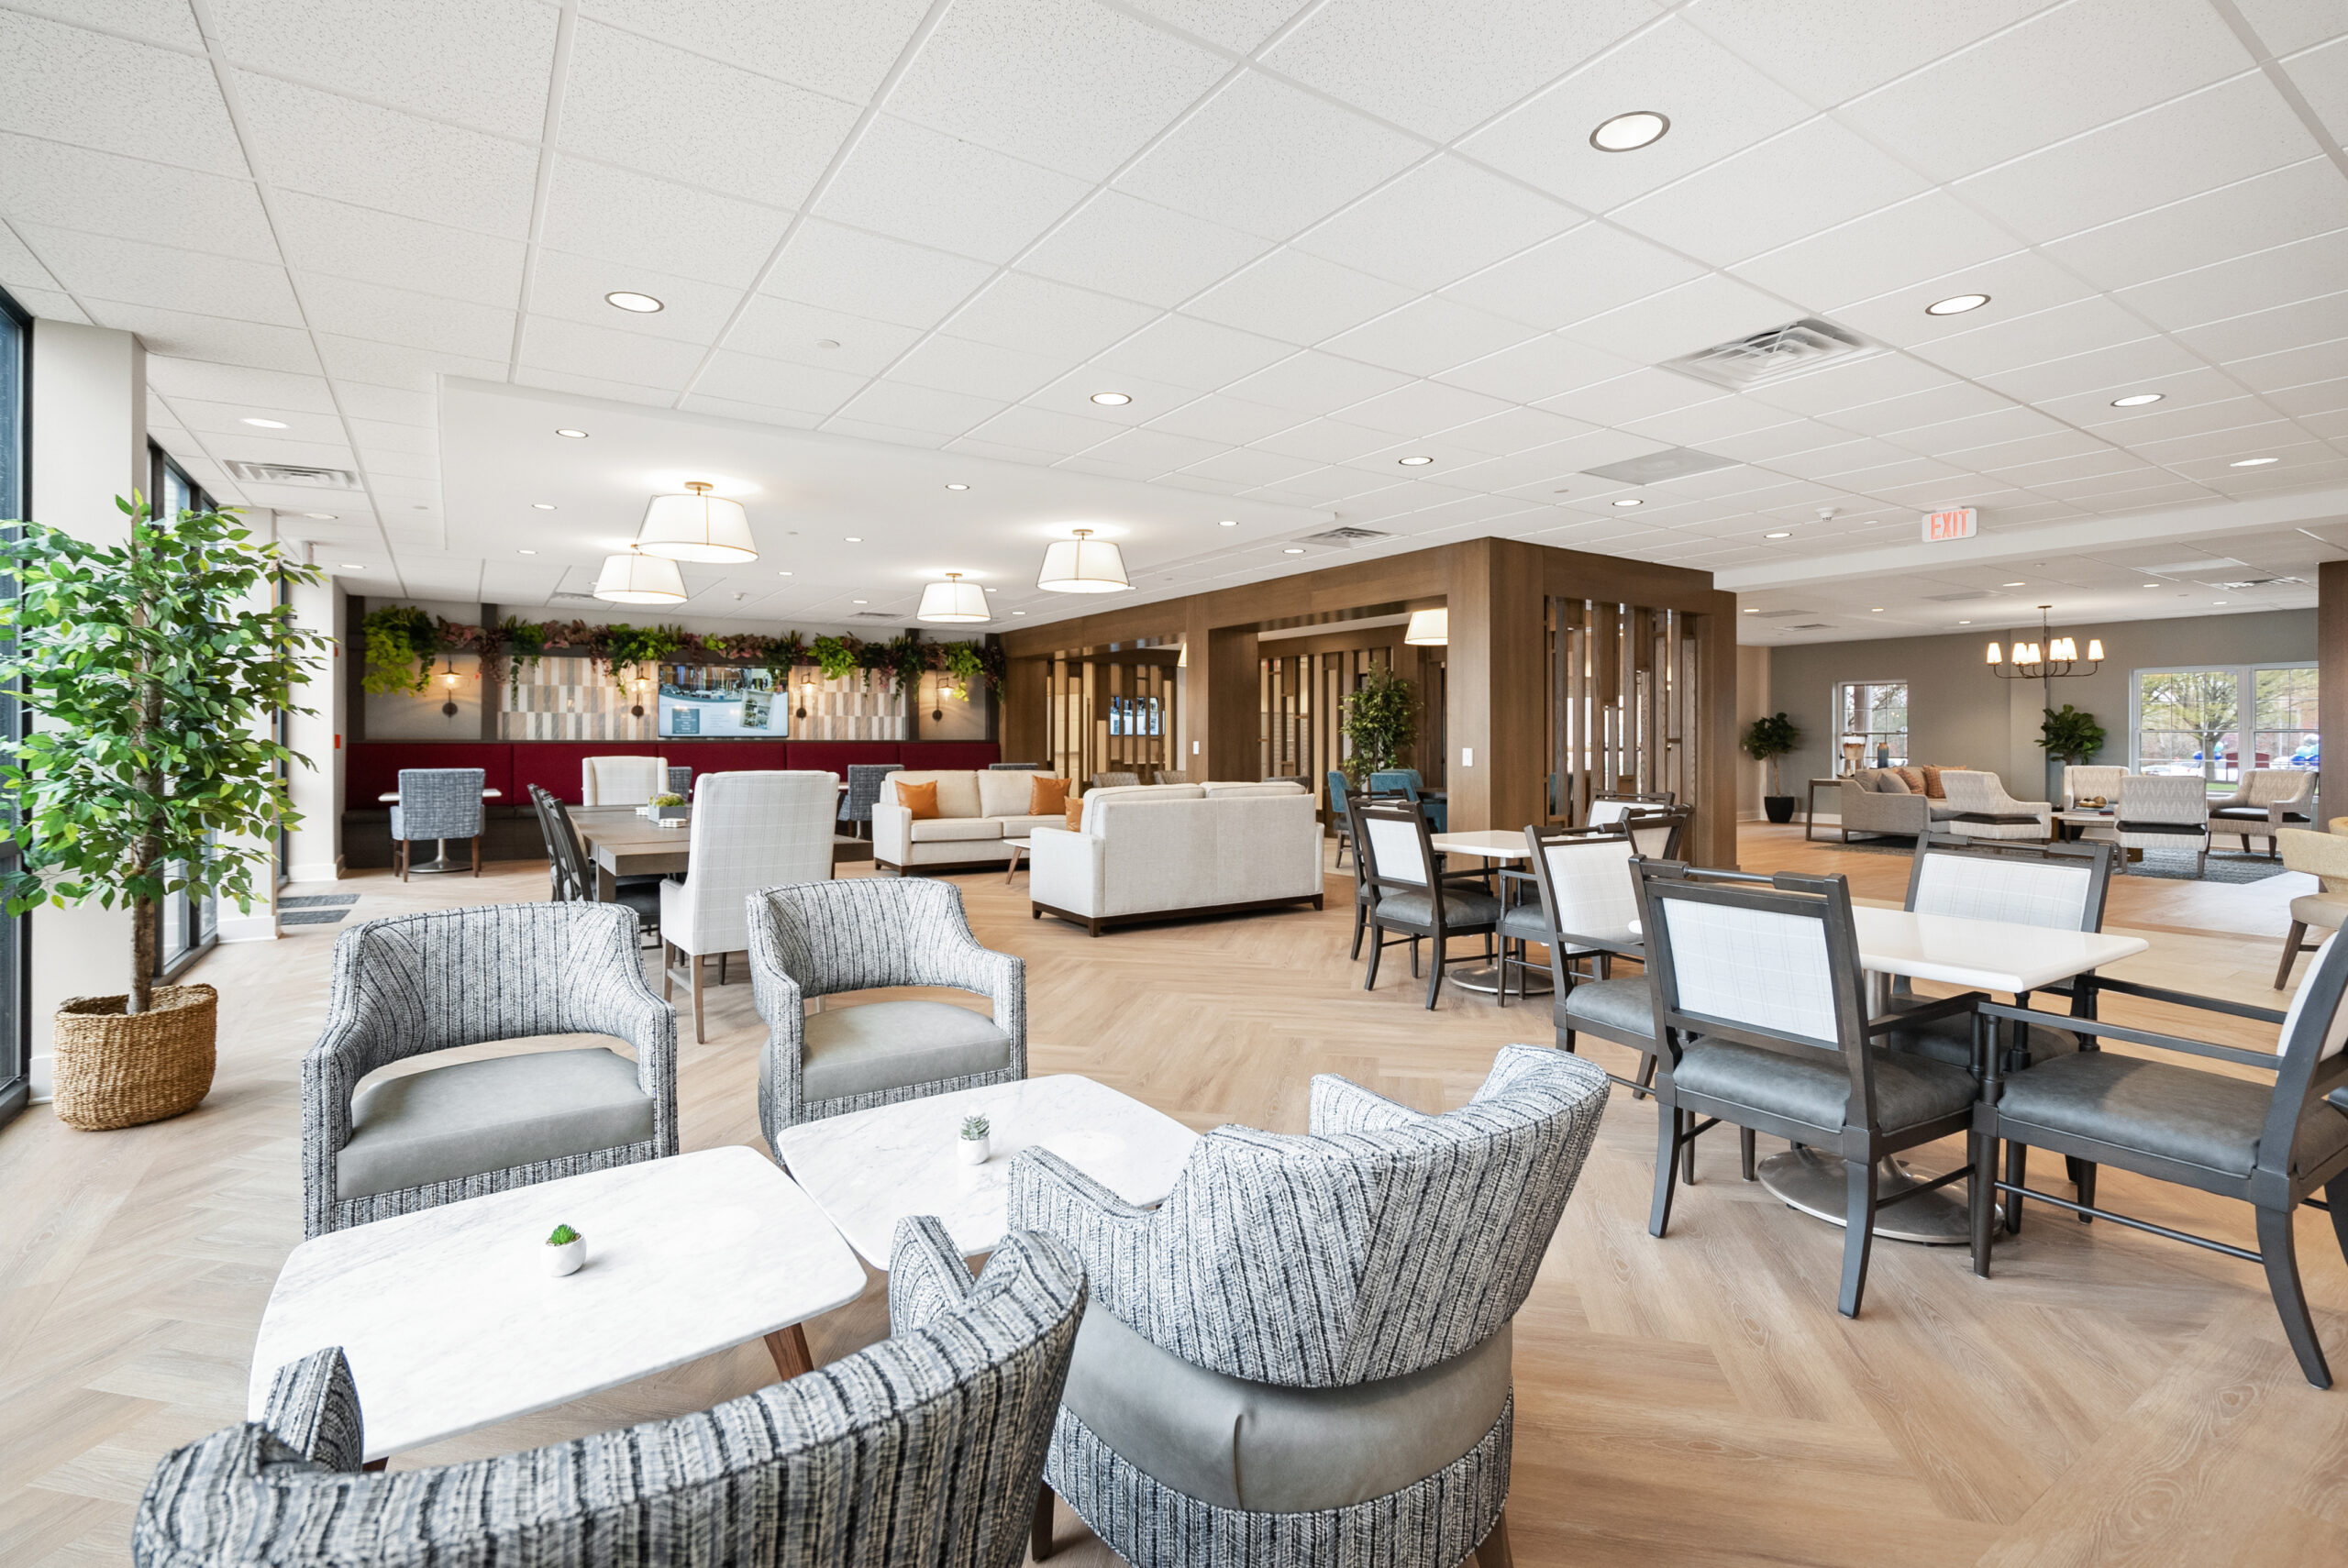 Cozy chairs and dining tables create a comfortable and welcoming atmosphere at Arbour Square of Harleysville PA Senior Living Community.